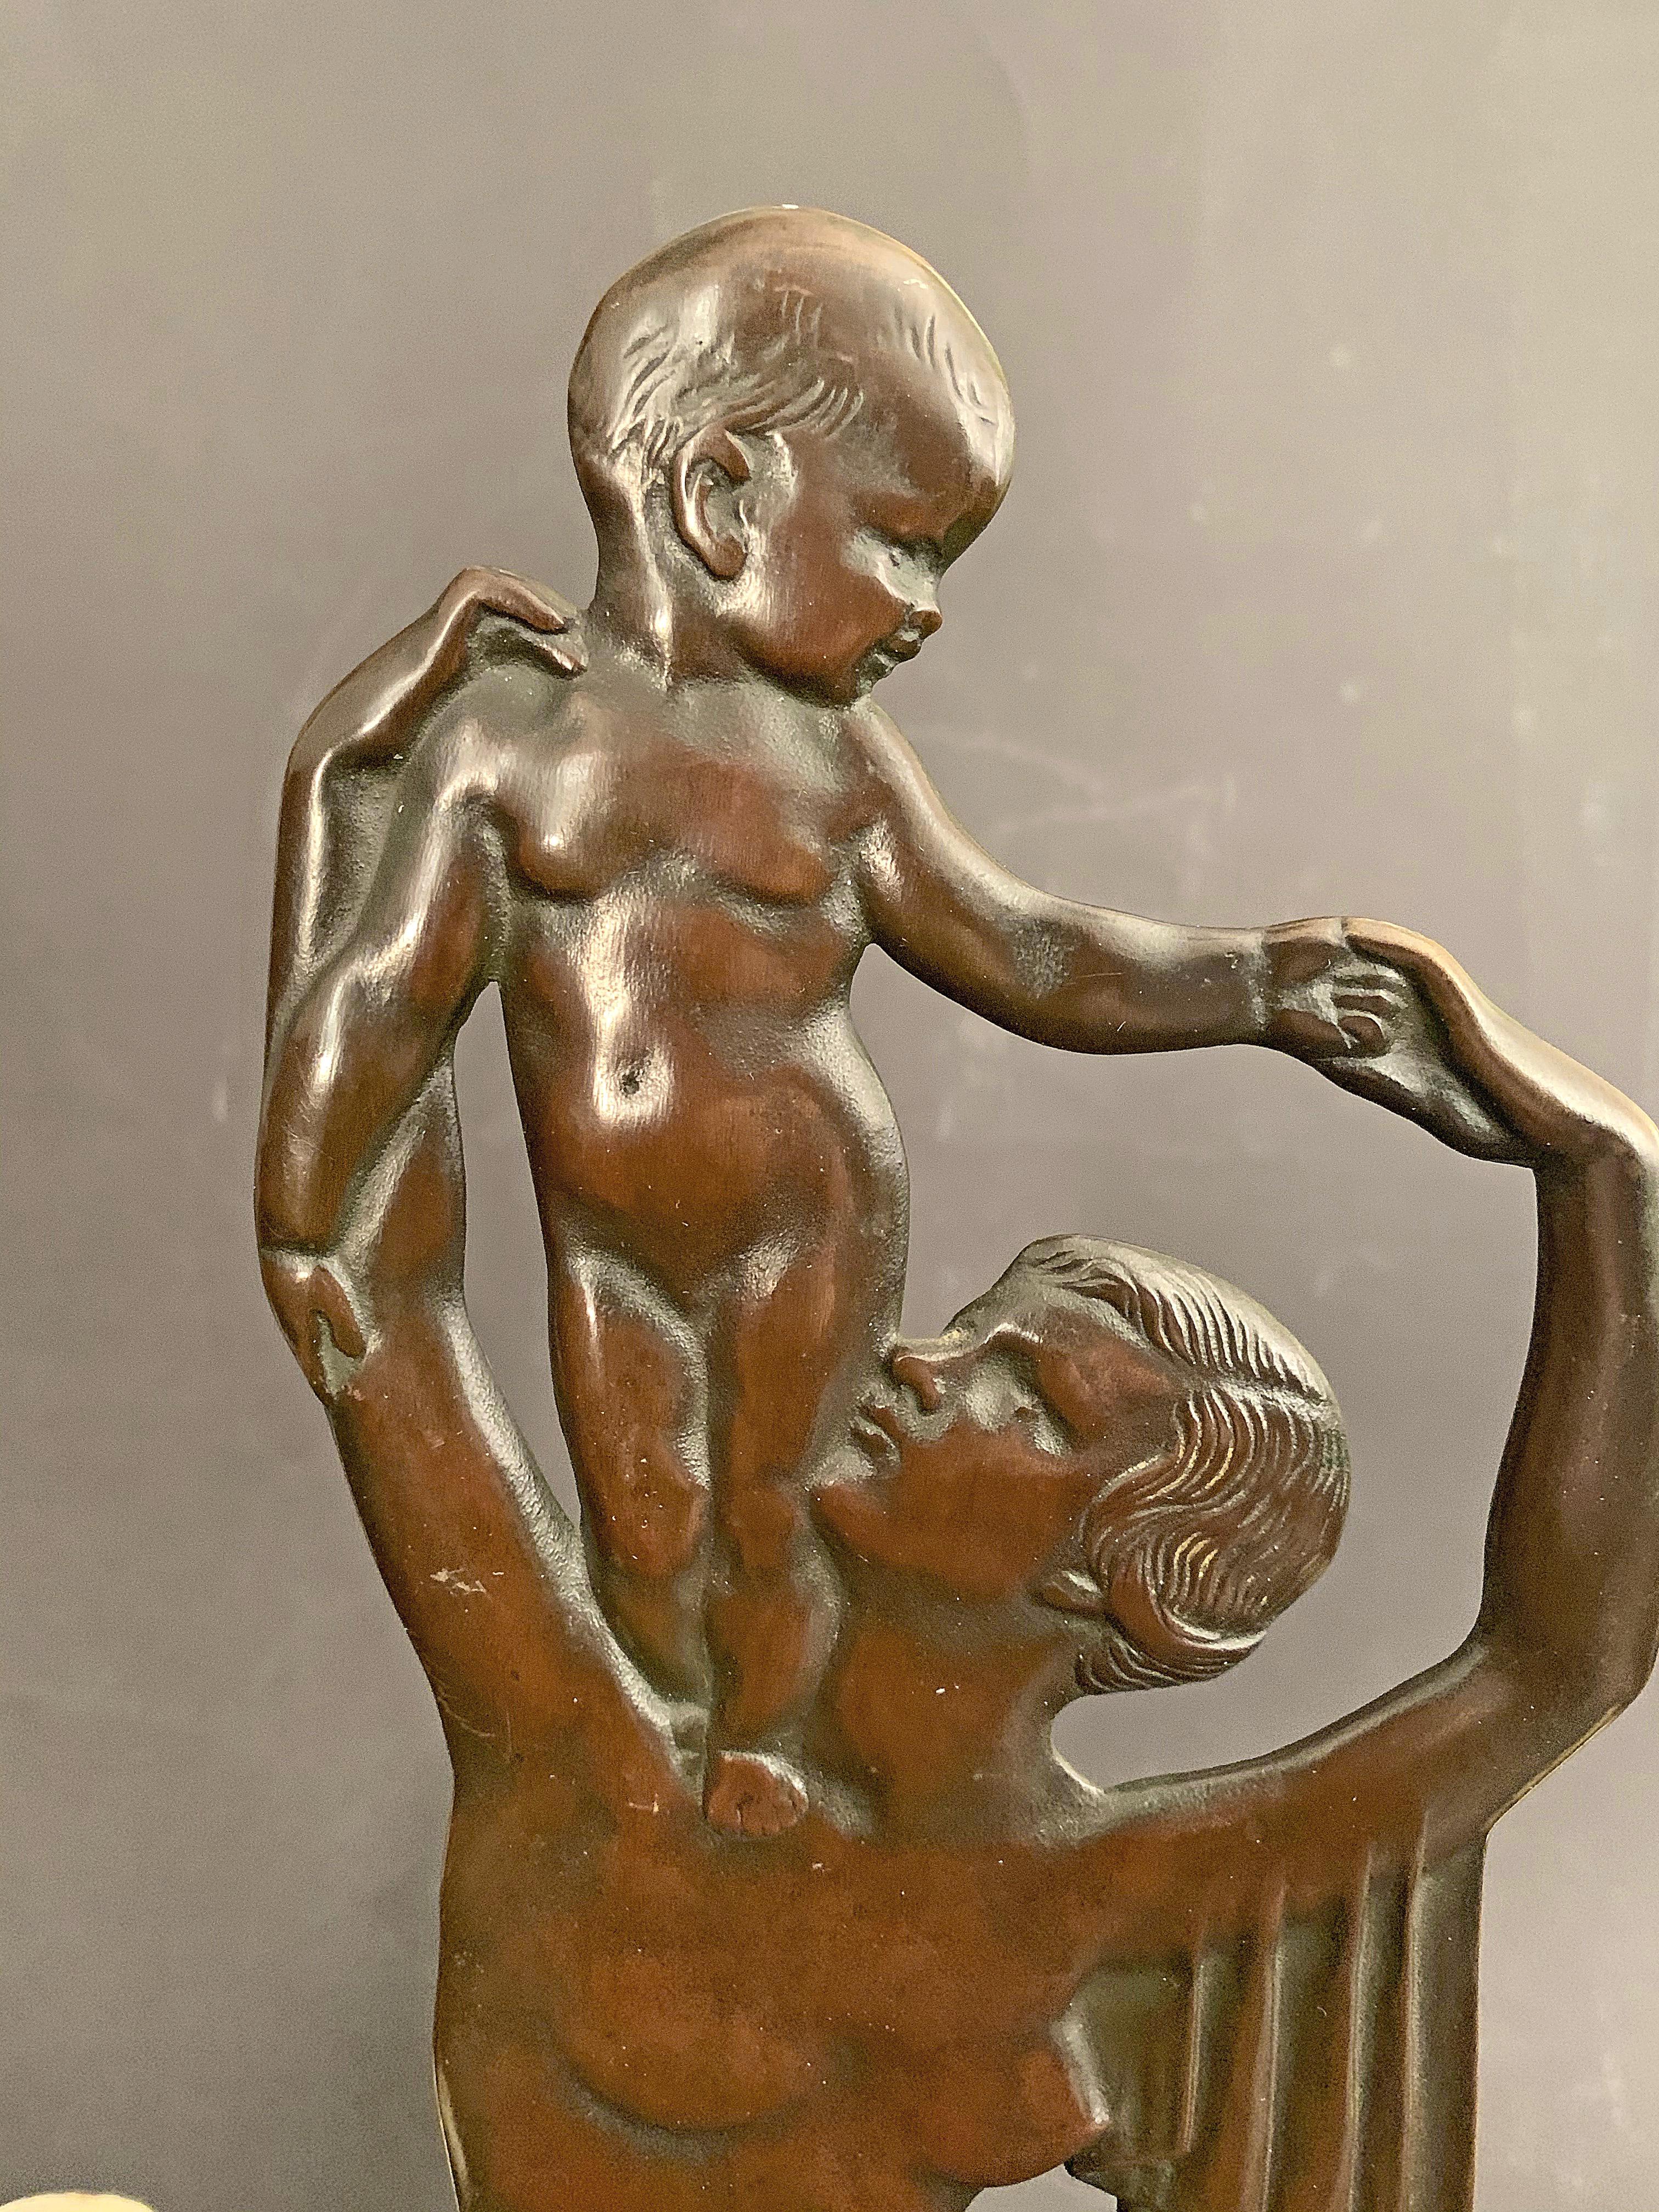 One of the most exquisitely beautiful bronzes sculptures we have ever offered, this extremely rare bronze centerpiece features a mother with her child standing on her shoulder, each figure beautifully modeled and executed. The sculpture is flanked